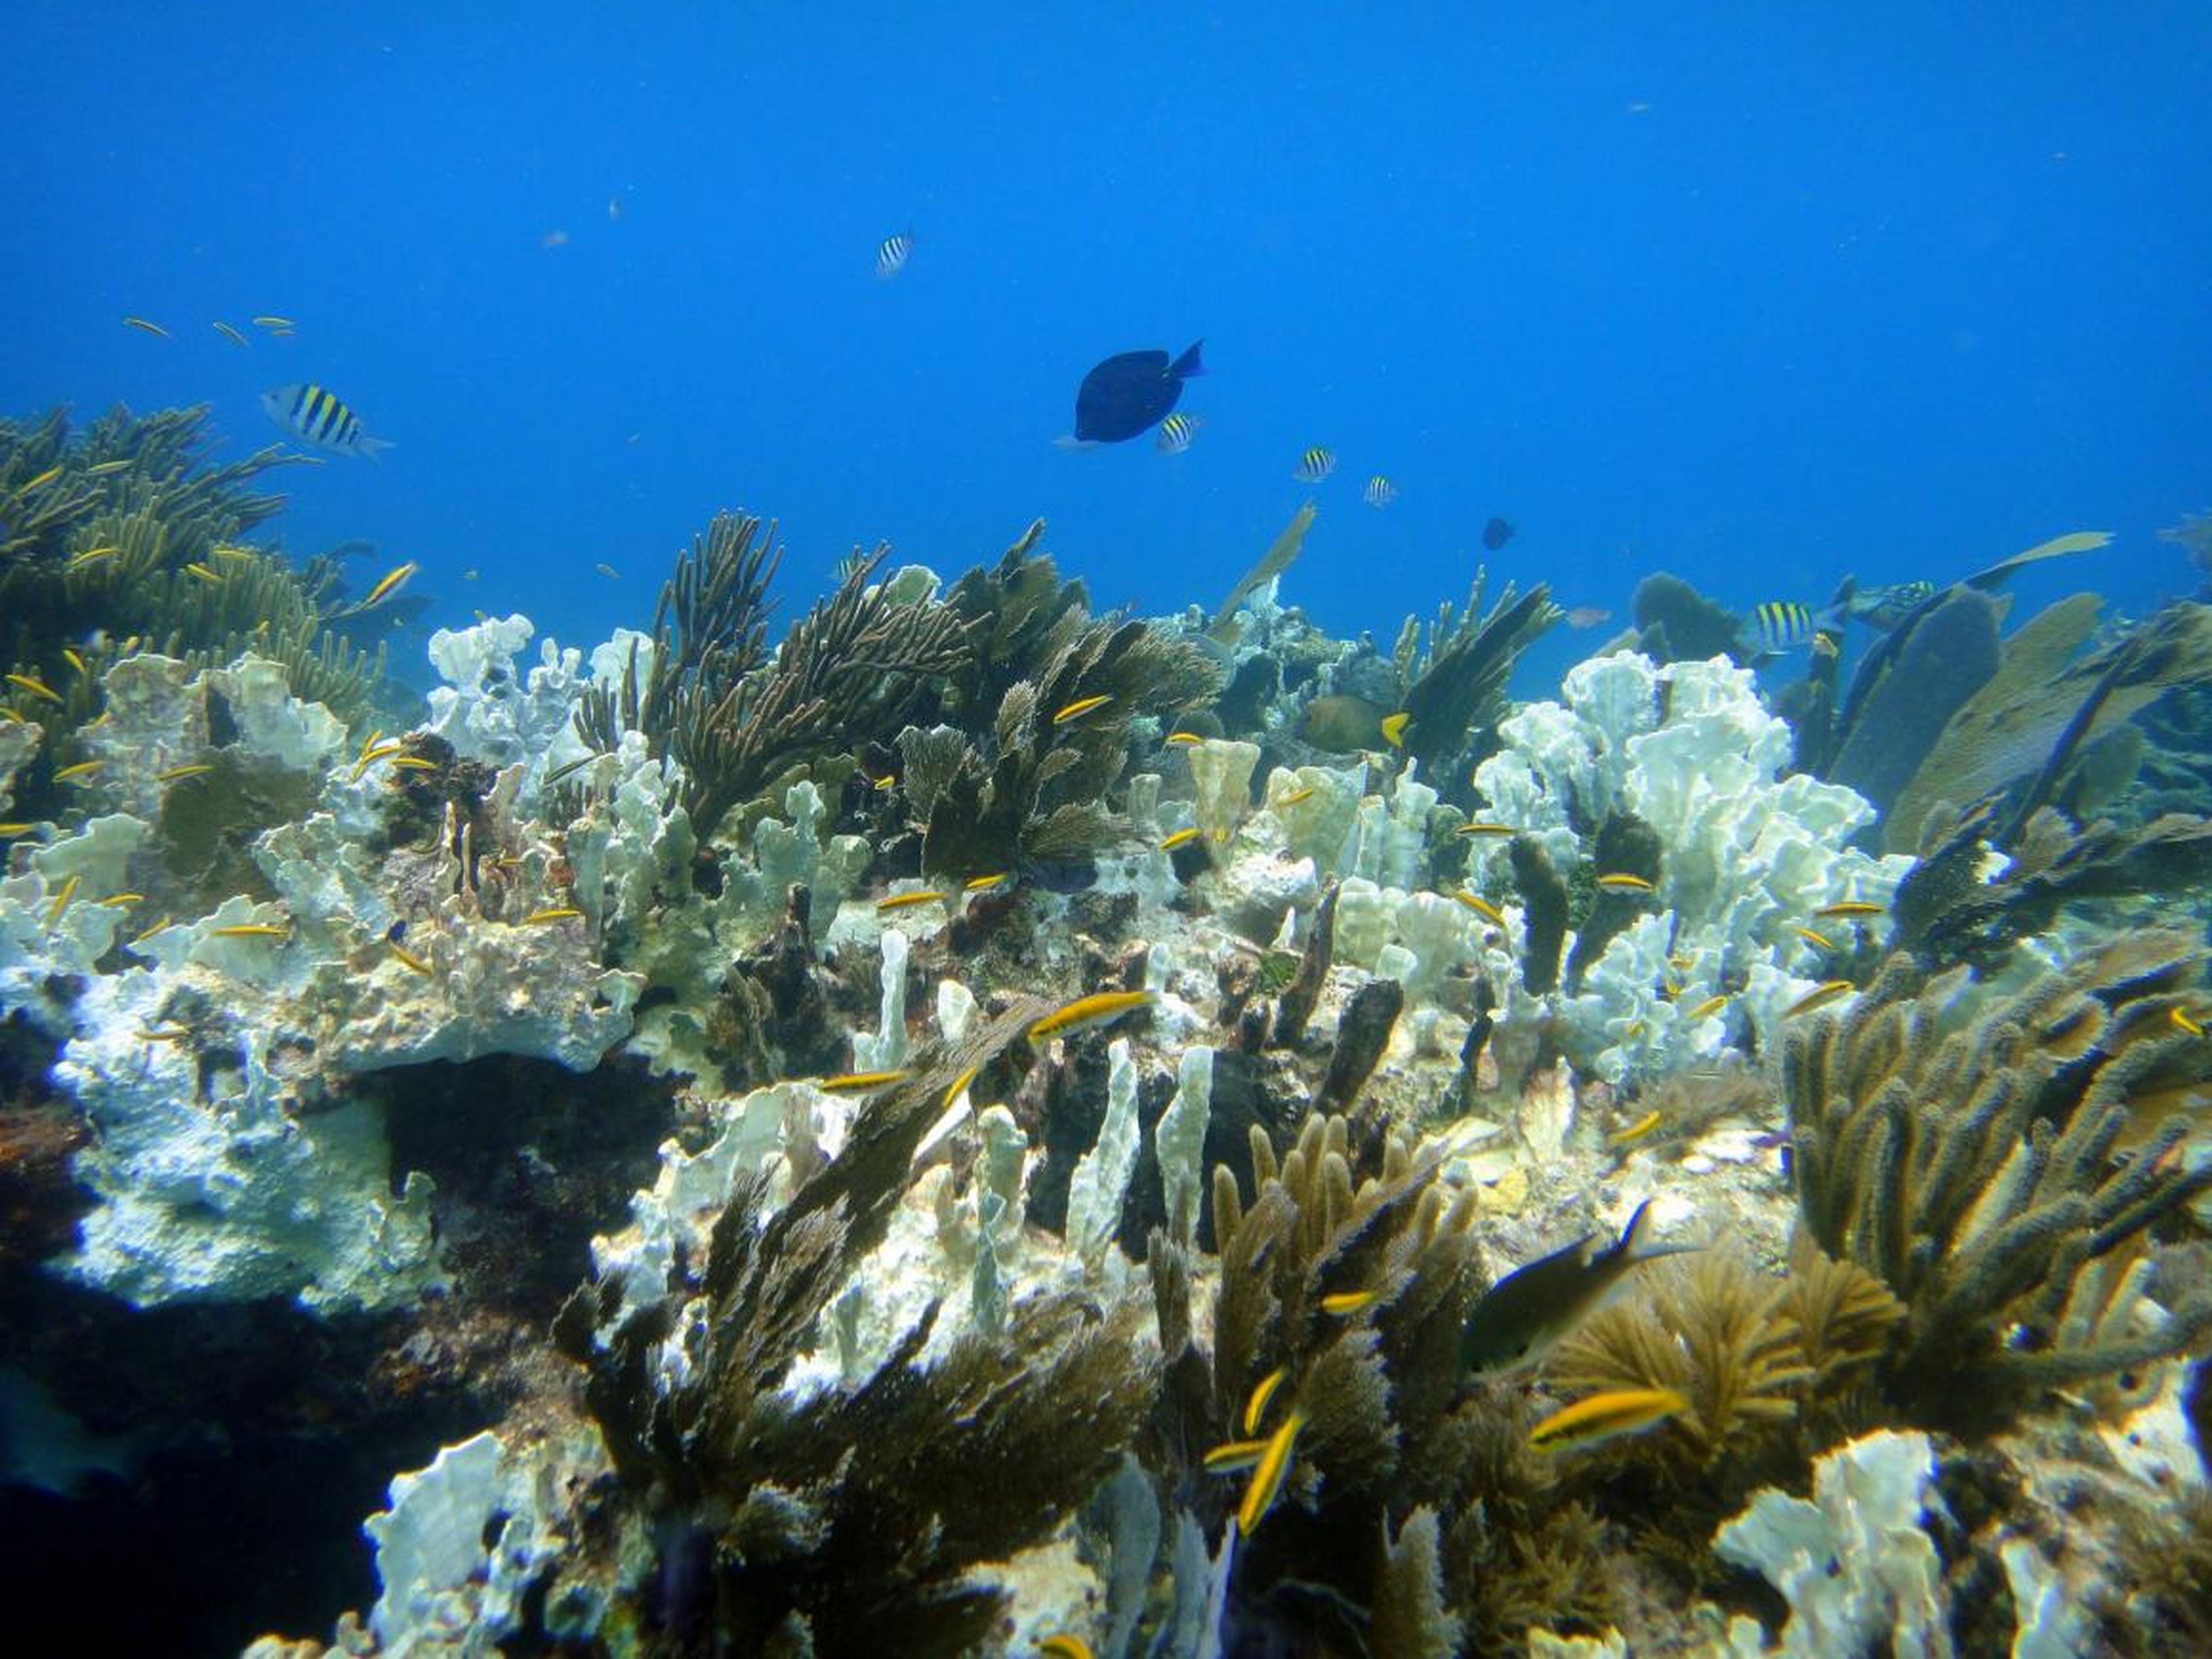 That warming threatens coral reefs worldwide. Warm waters cause corals to expel the algae living in their their tissues and turn white in a process called bleaching. At present rates, it's expected that 60% of all coral reefs will